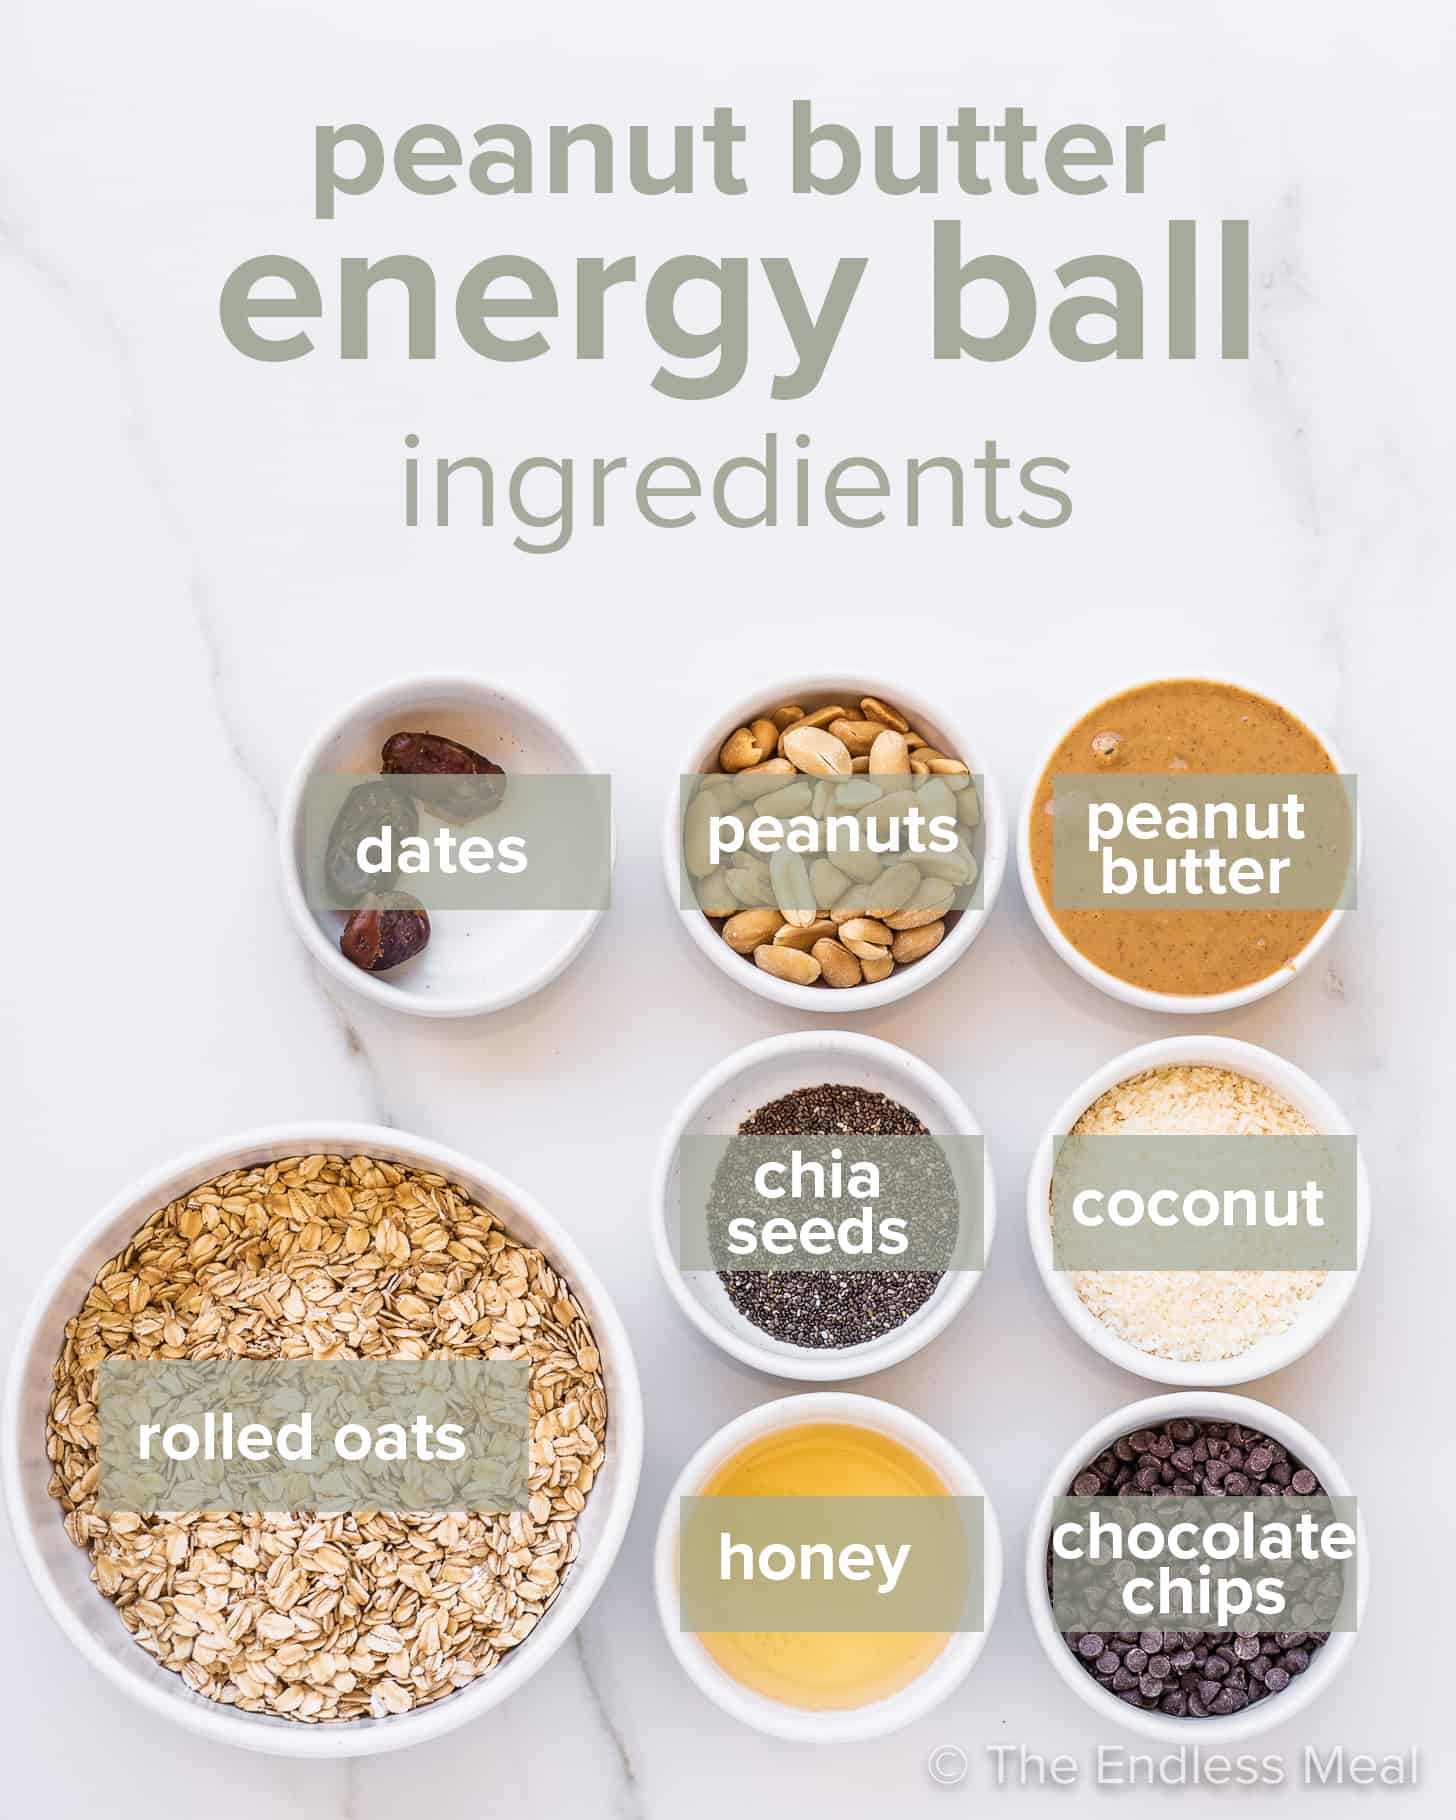 the ingredients needed to make peanut butter energy balls